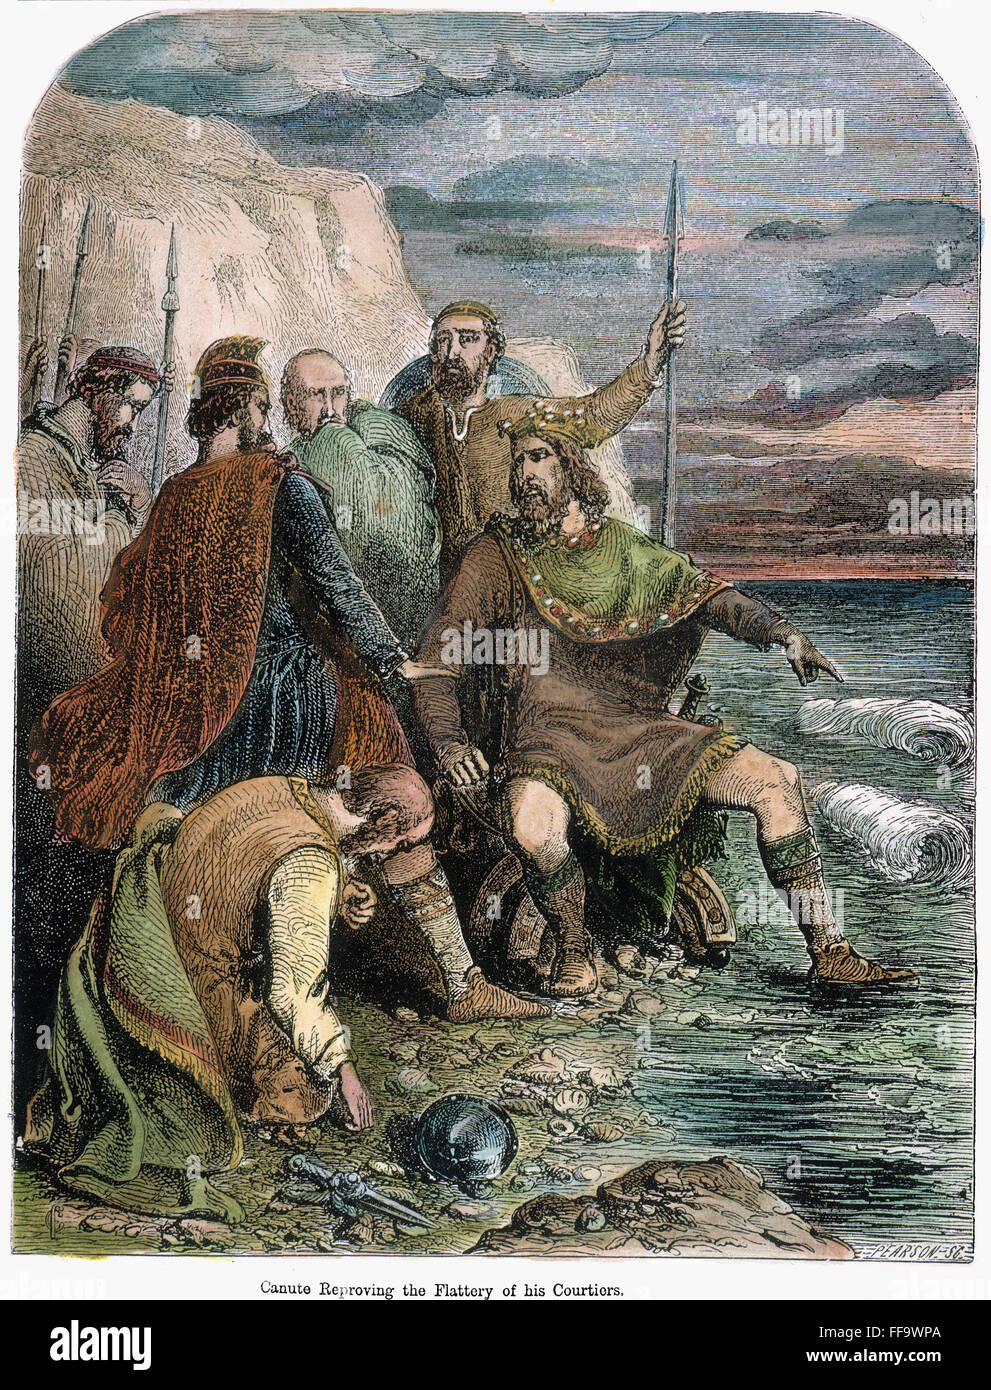 CANUTE I (c995-1035). /nKing of England (1016-35), of Denmark (1019-35), and of Norway (1028-35). Canute convinces his courtiers that he does not have power to stem the tide. Wood engraving, English, 19th century. Stock Photo